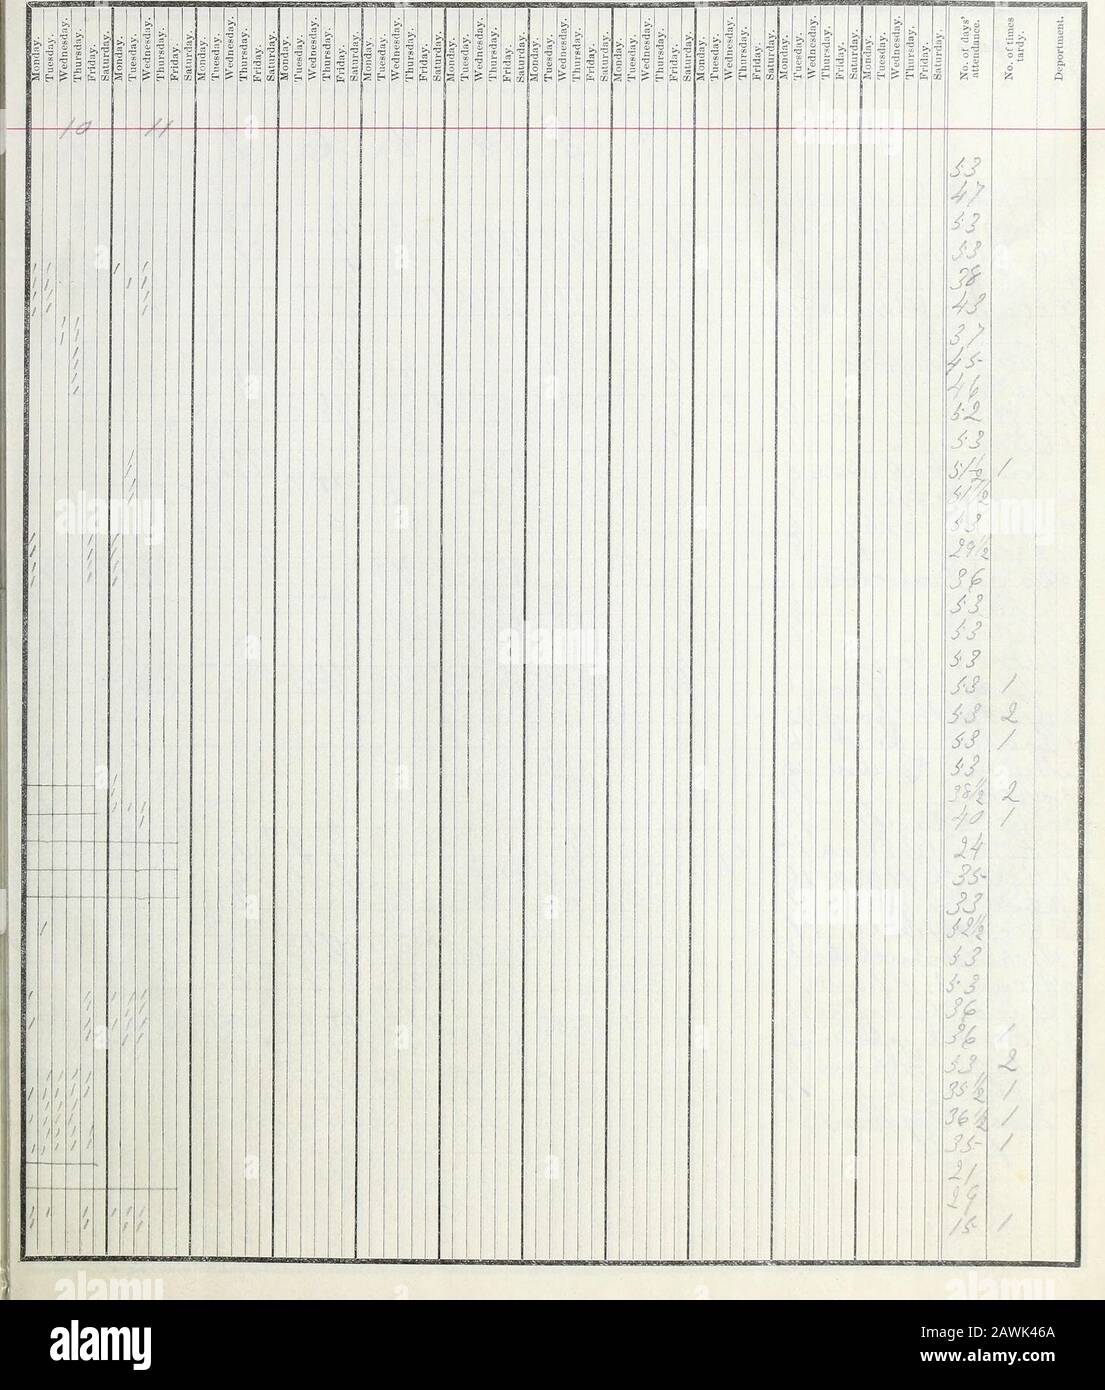 Ten Hatfield School registers, 1880-1881 . ^/ ? J/Jk lv ^- y- *a 7^ ta oj ?T-^ 18 .and ending 18 , taught by. RECORD OF ATTENDANCE in the Lc^/a. {a/L&. 7 ,/l/fl/Hejr 4f Scholars. AGE // Stock Photo